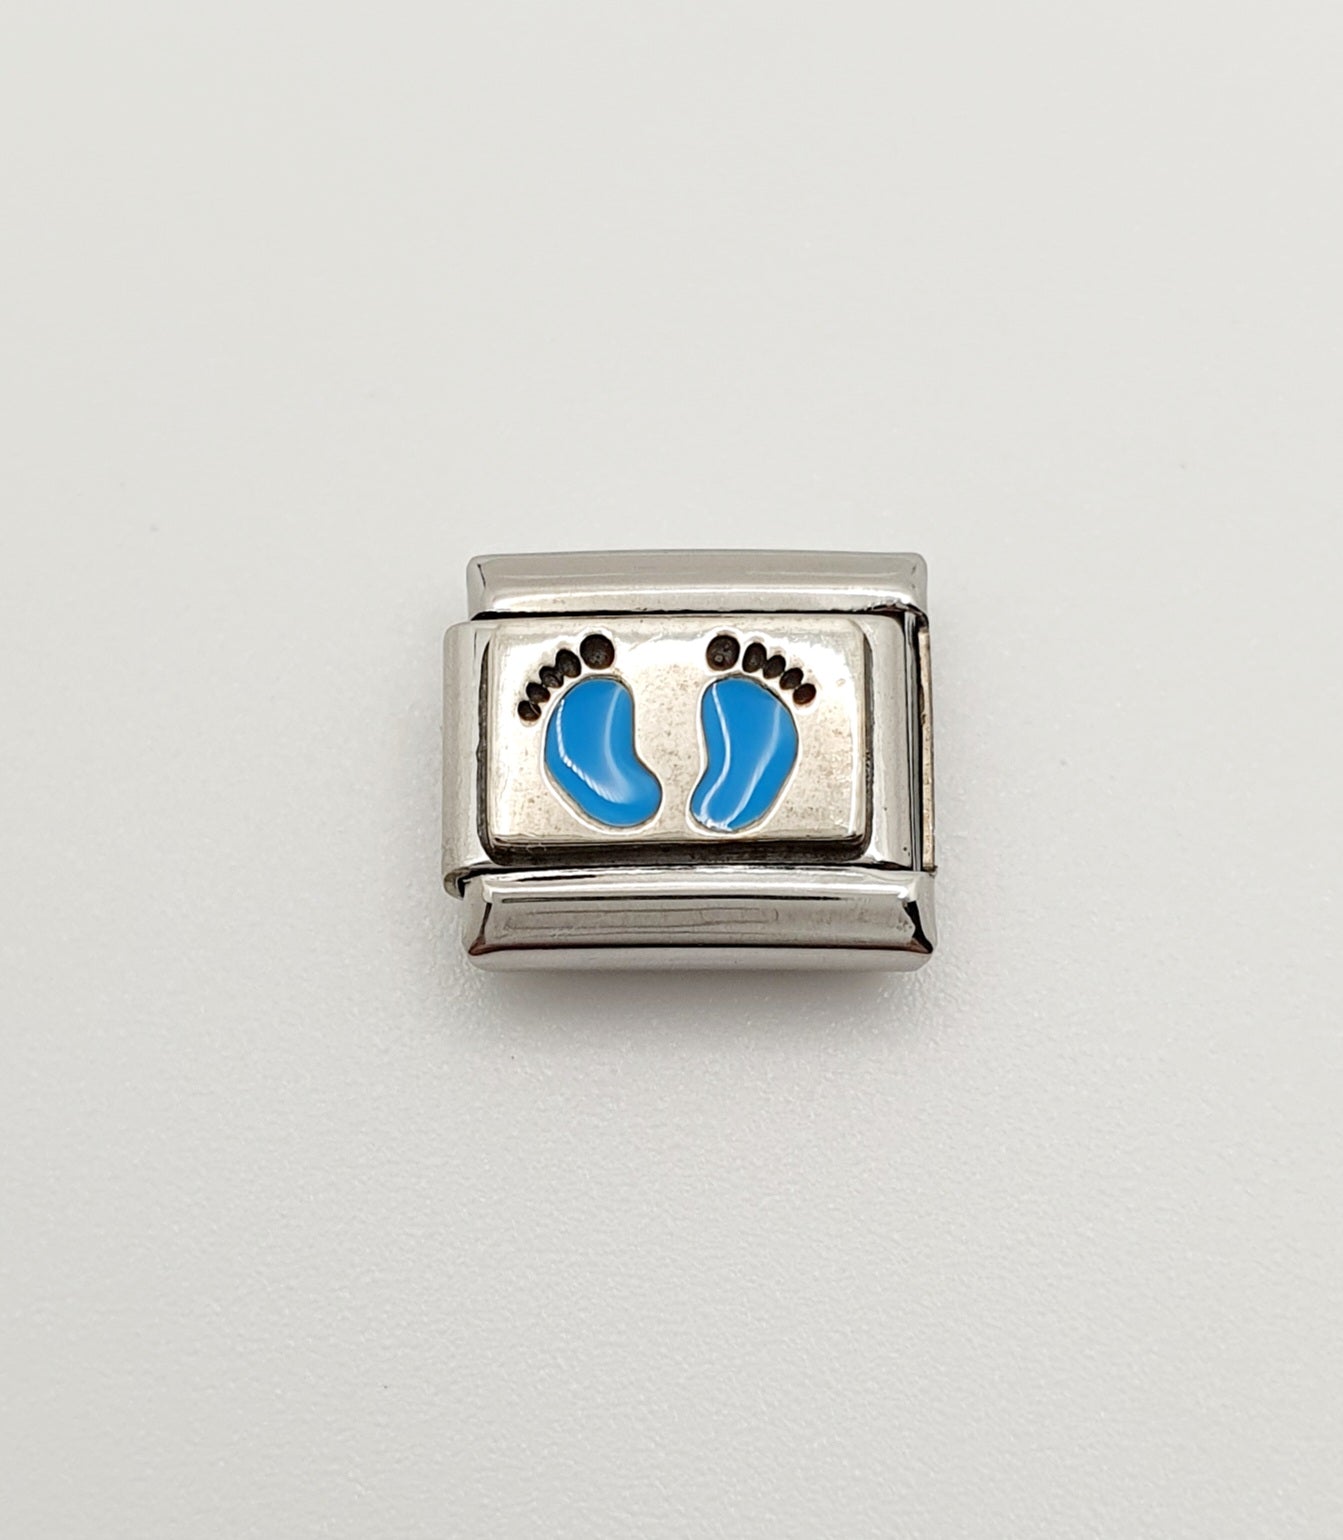 Nomination Charm Link "Blue Footprints" Stainless Steel with Enamel & 925 Silver, 330208 15